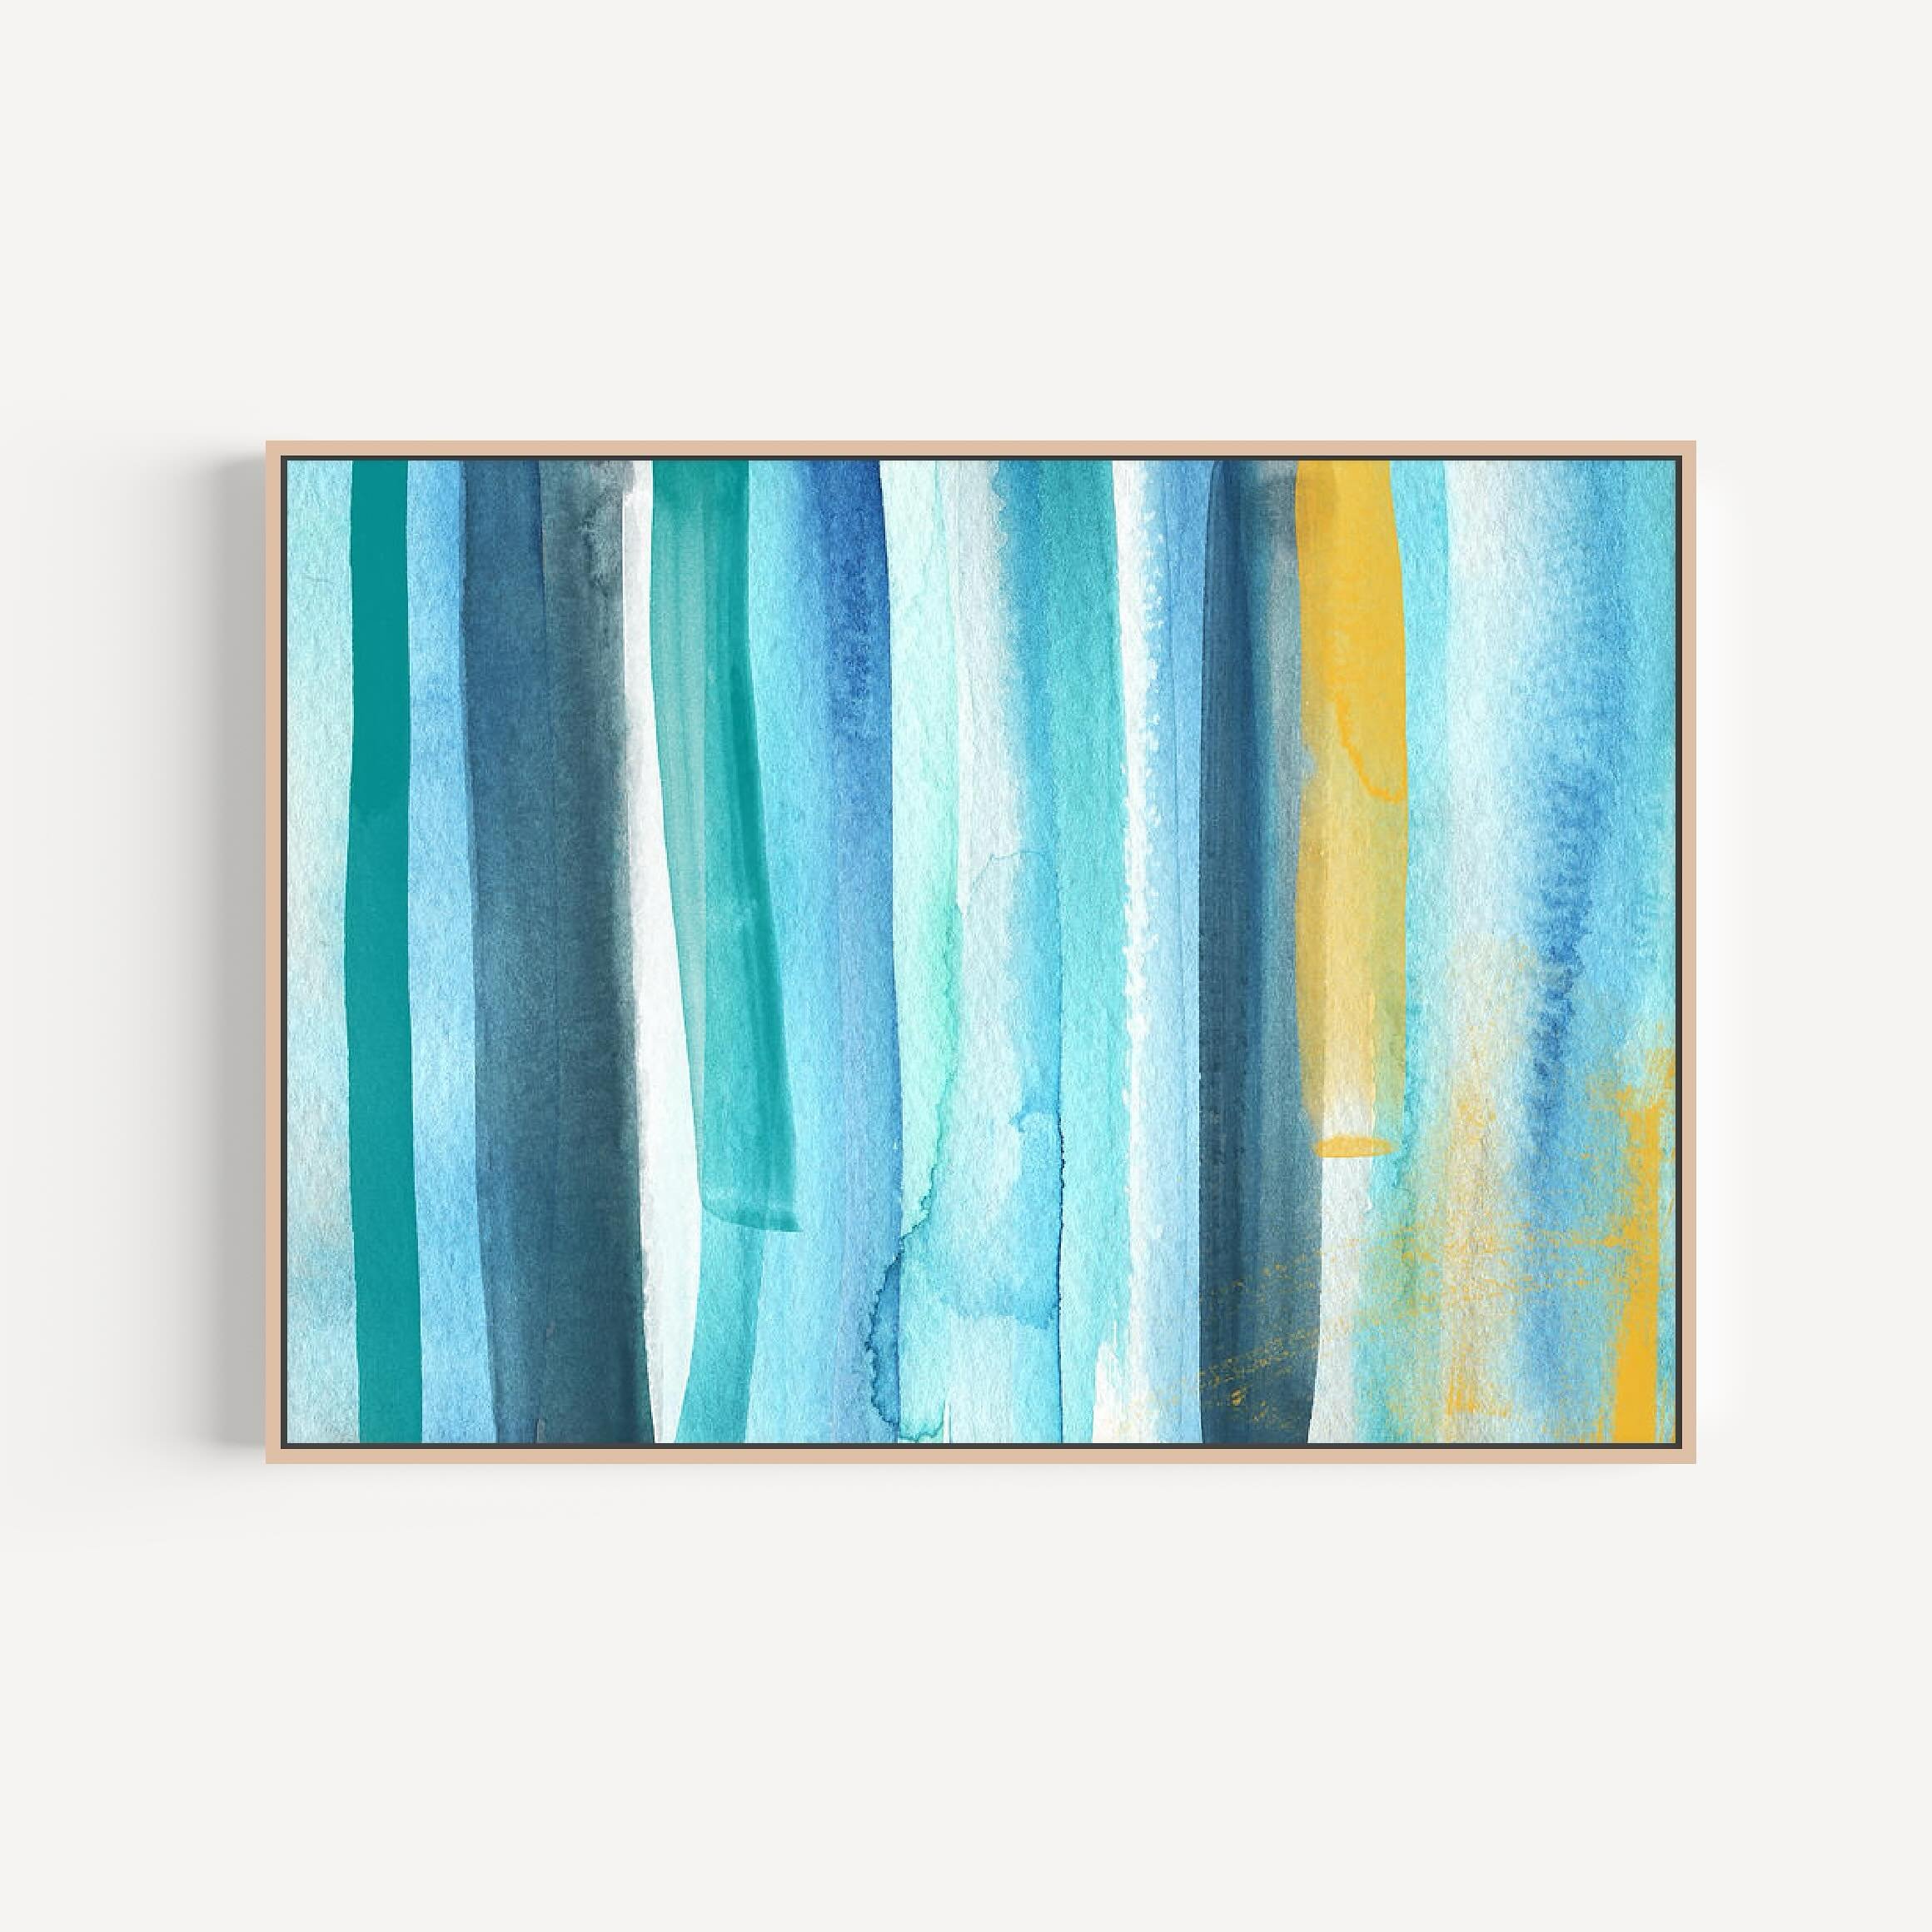 Sunny beach day colors 🙌🏻

Title: Summer Surf
Prints for all size spaces and budgets are available in my shop. Link in bio @lindawoodsart